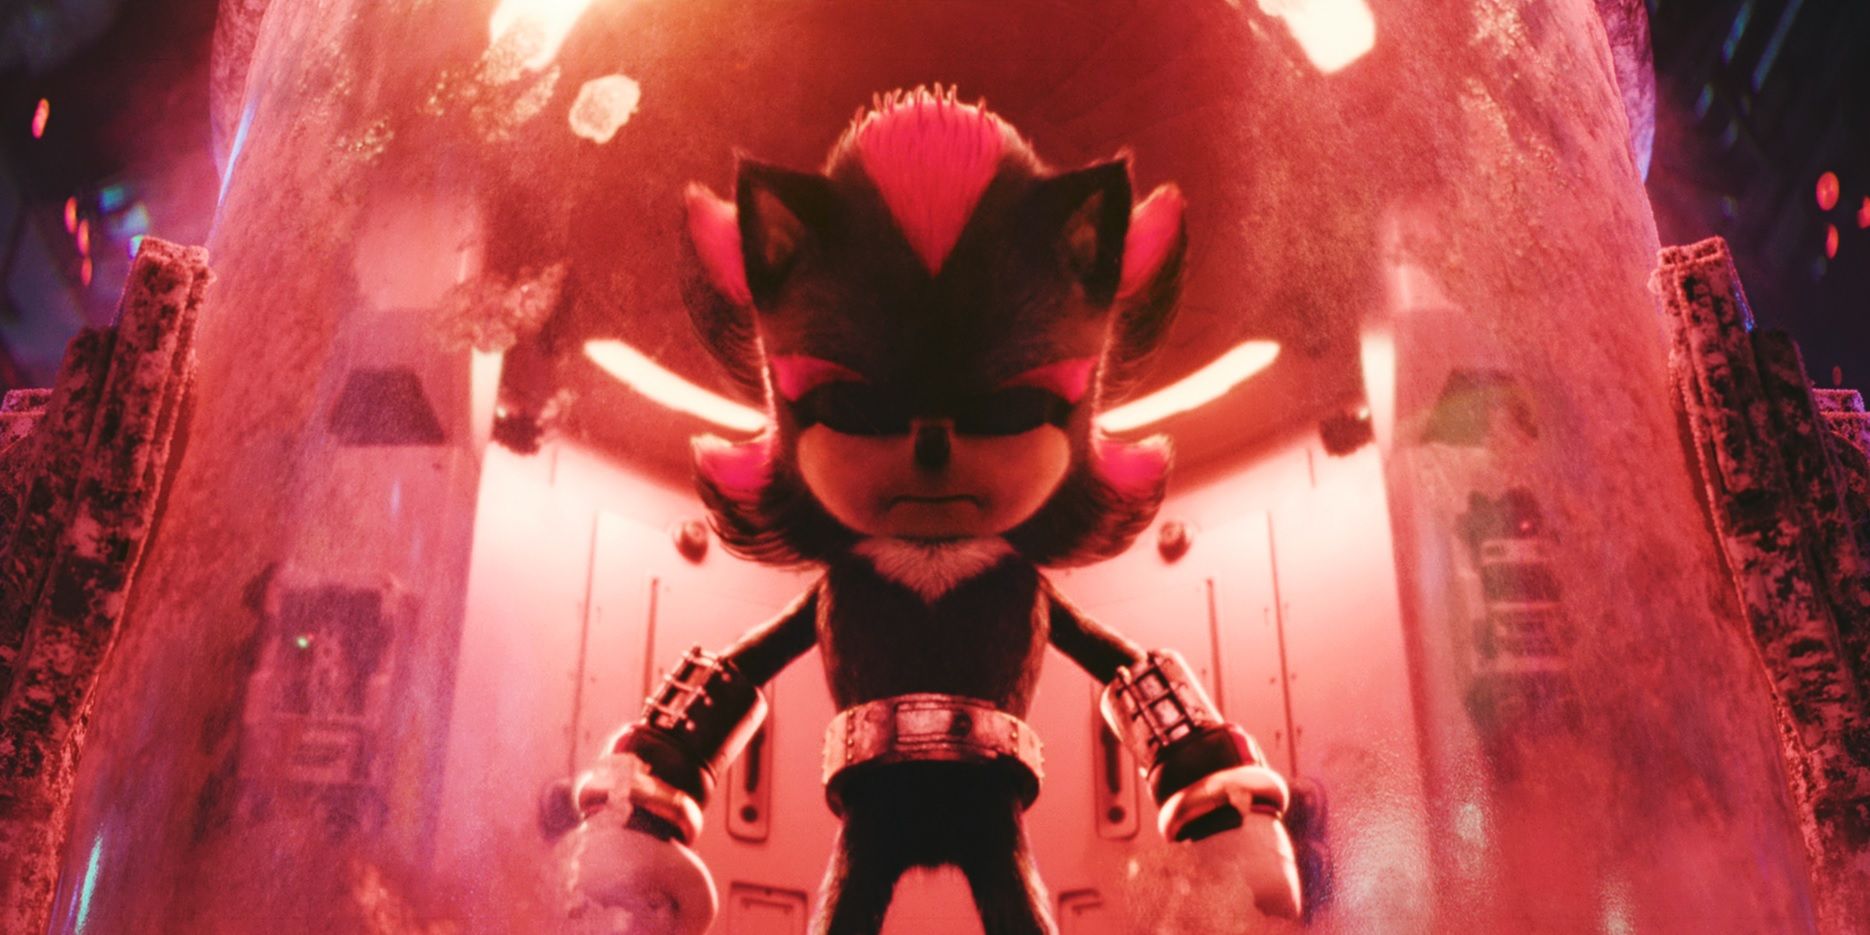 COMMSS OPEN) JocelynMinions on X: Sonic Movie 3? We still don't know what Sonic  Movie 3 will be about, but I hope that Shadow will soon appear in future Sonic  movies and